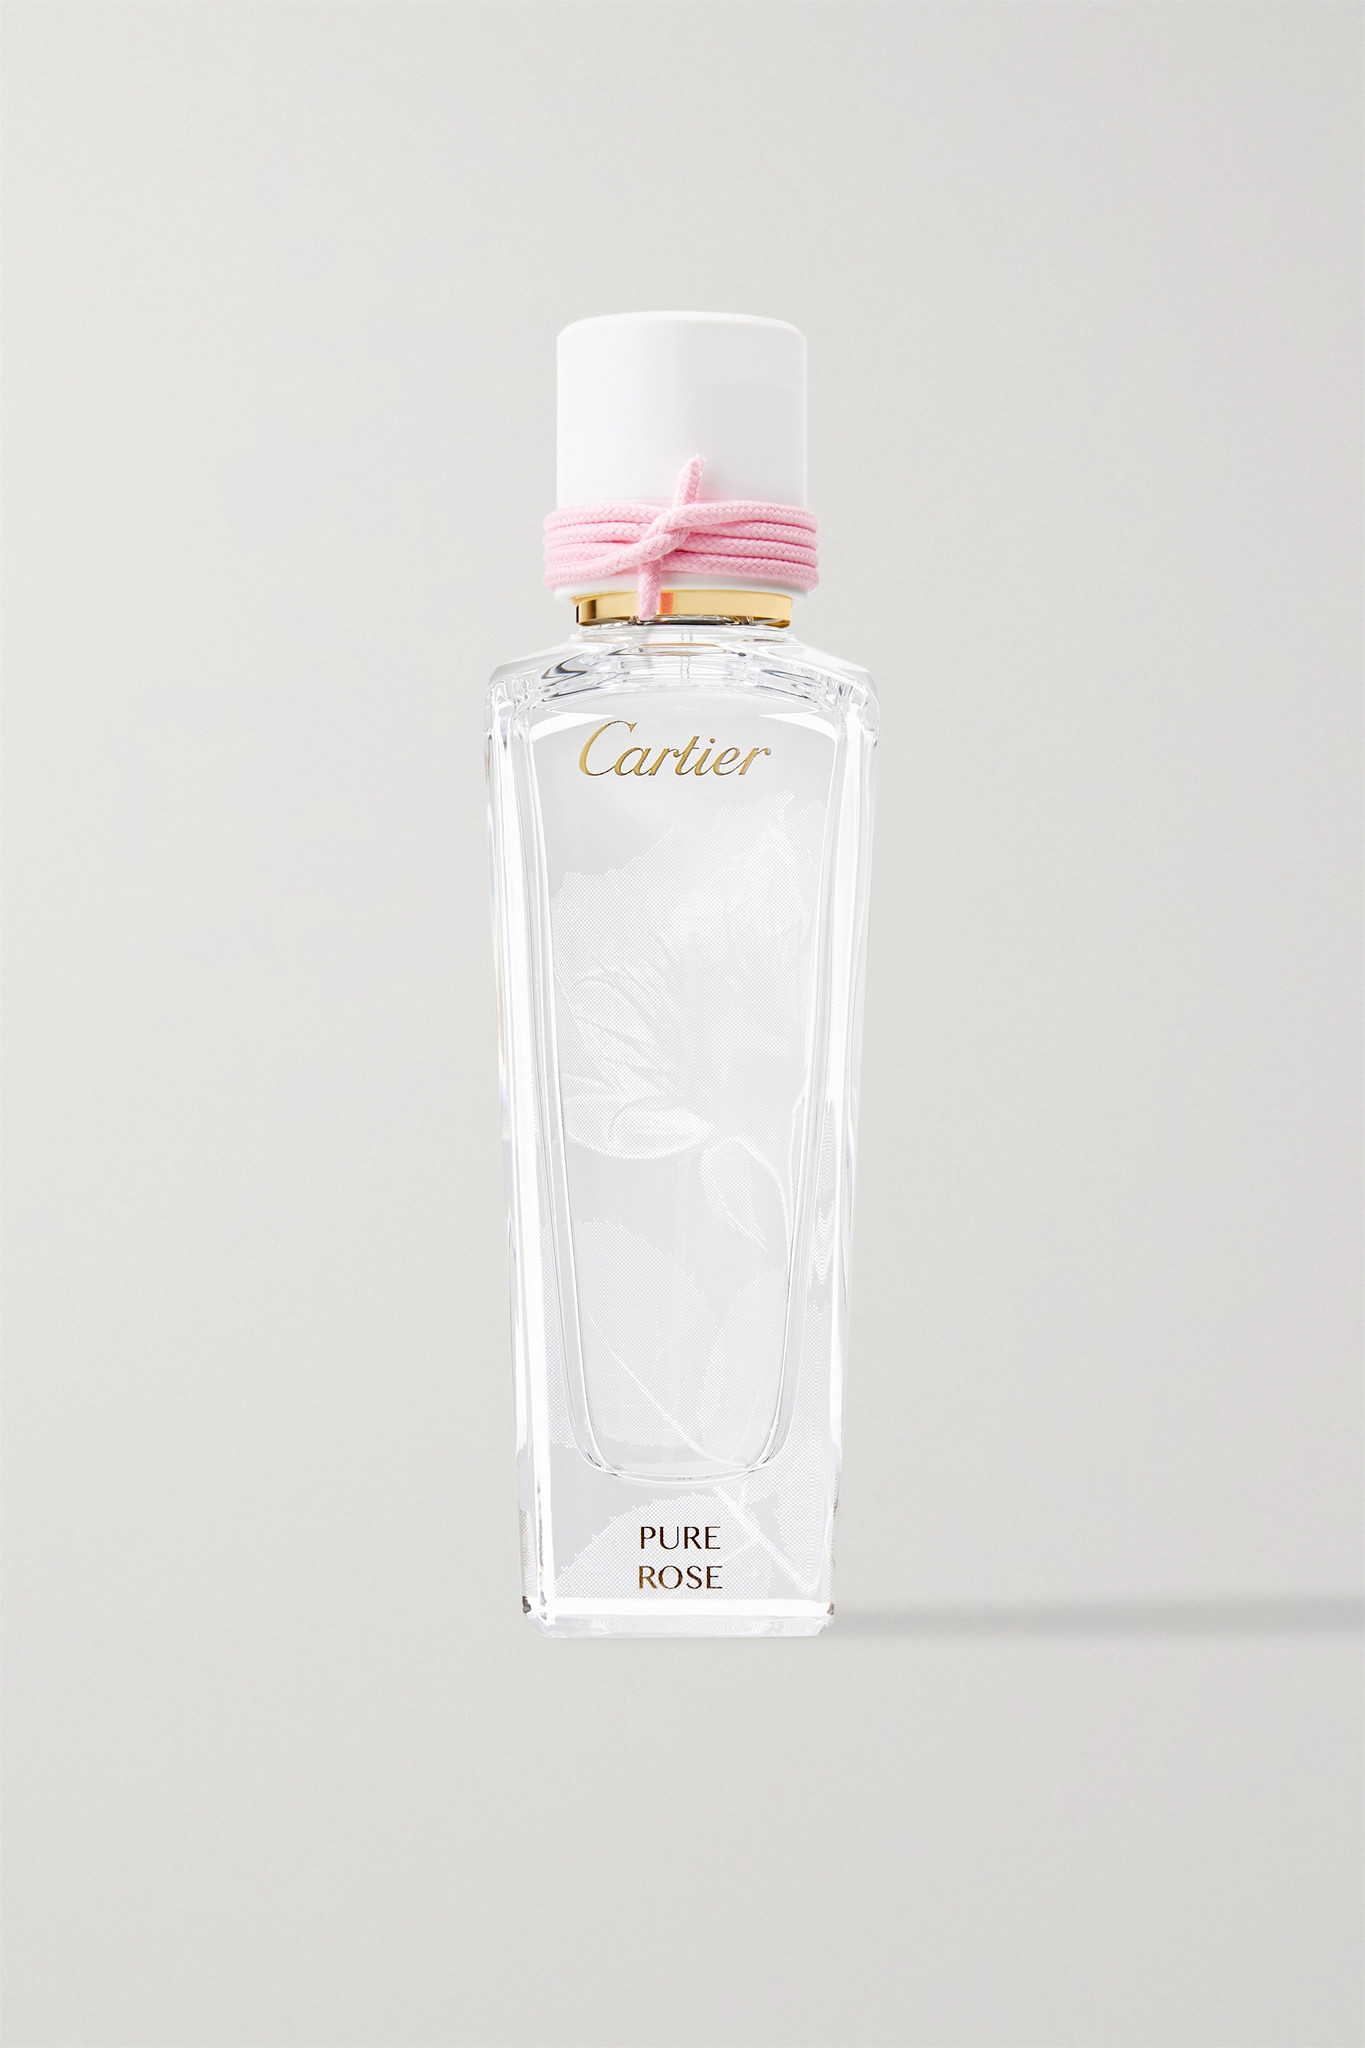 cartier extracts